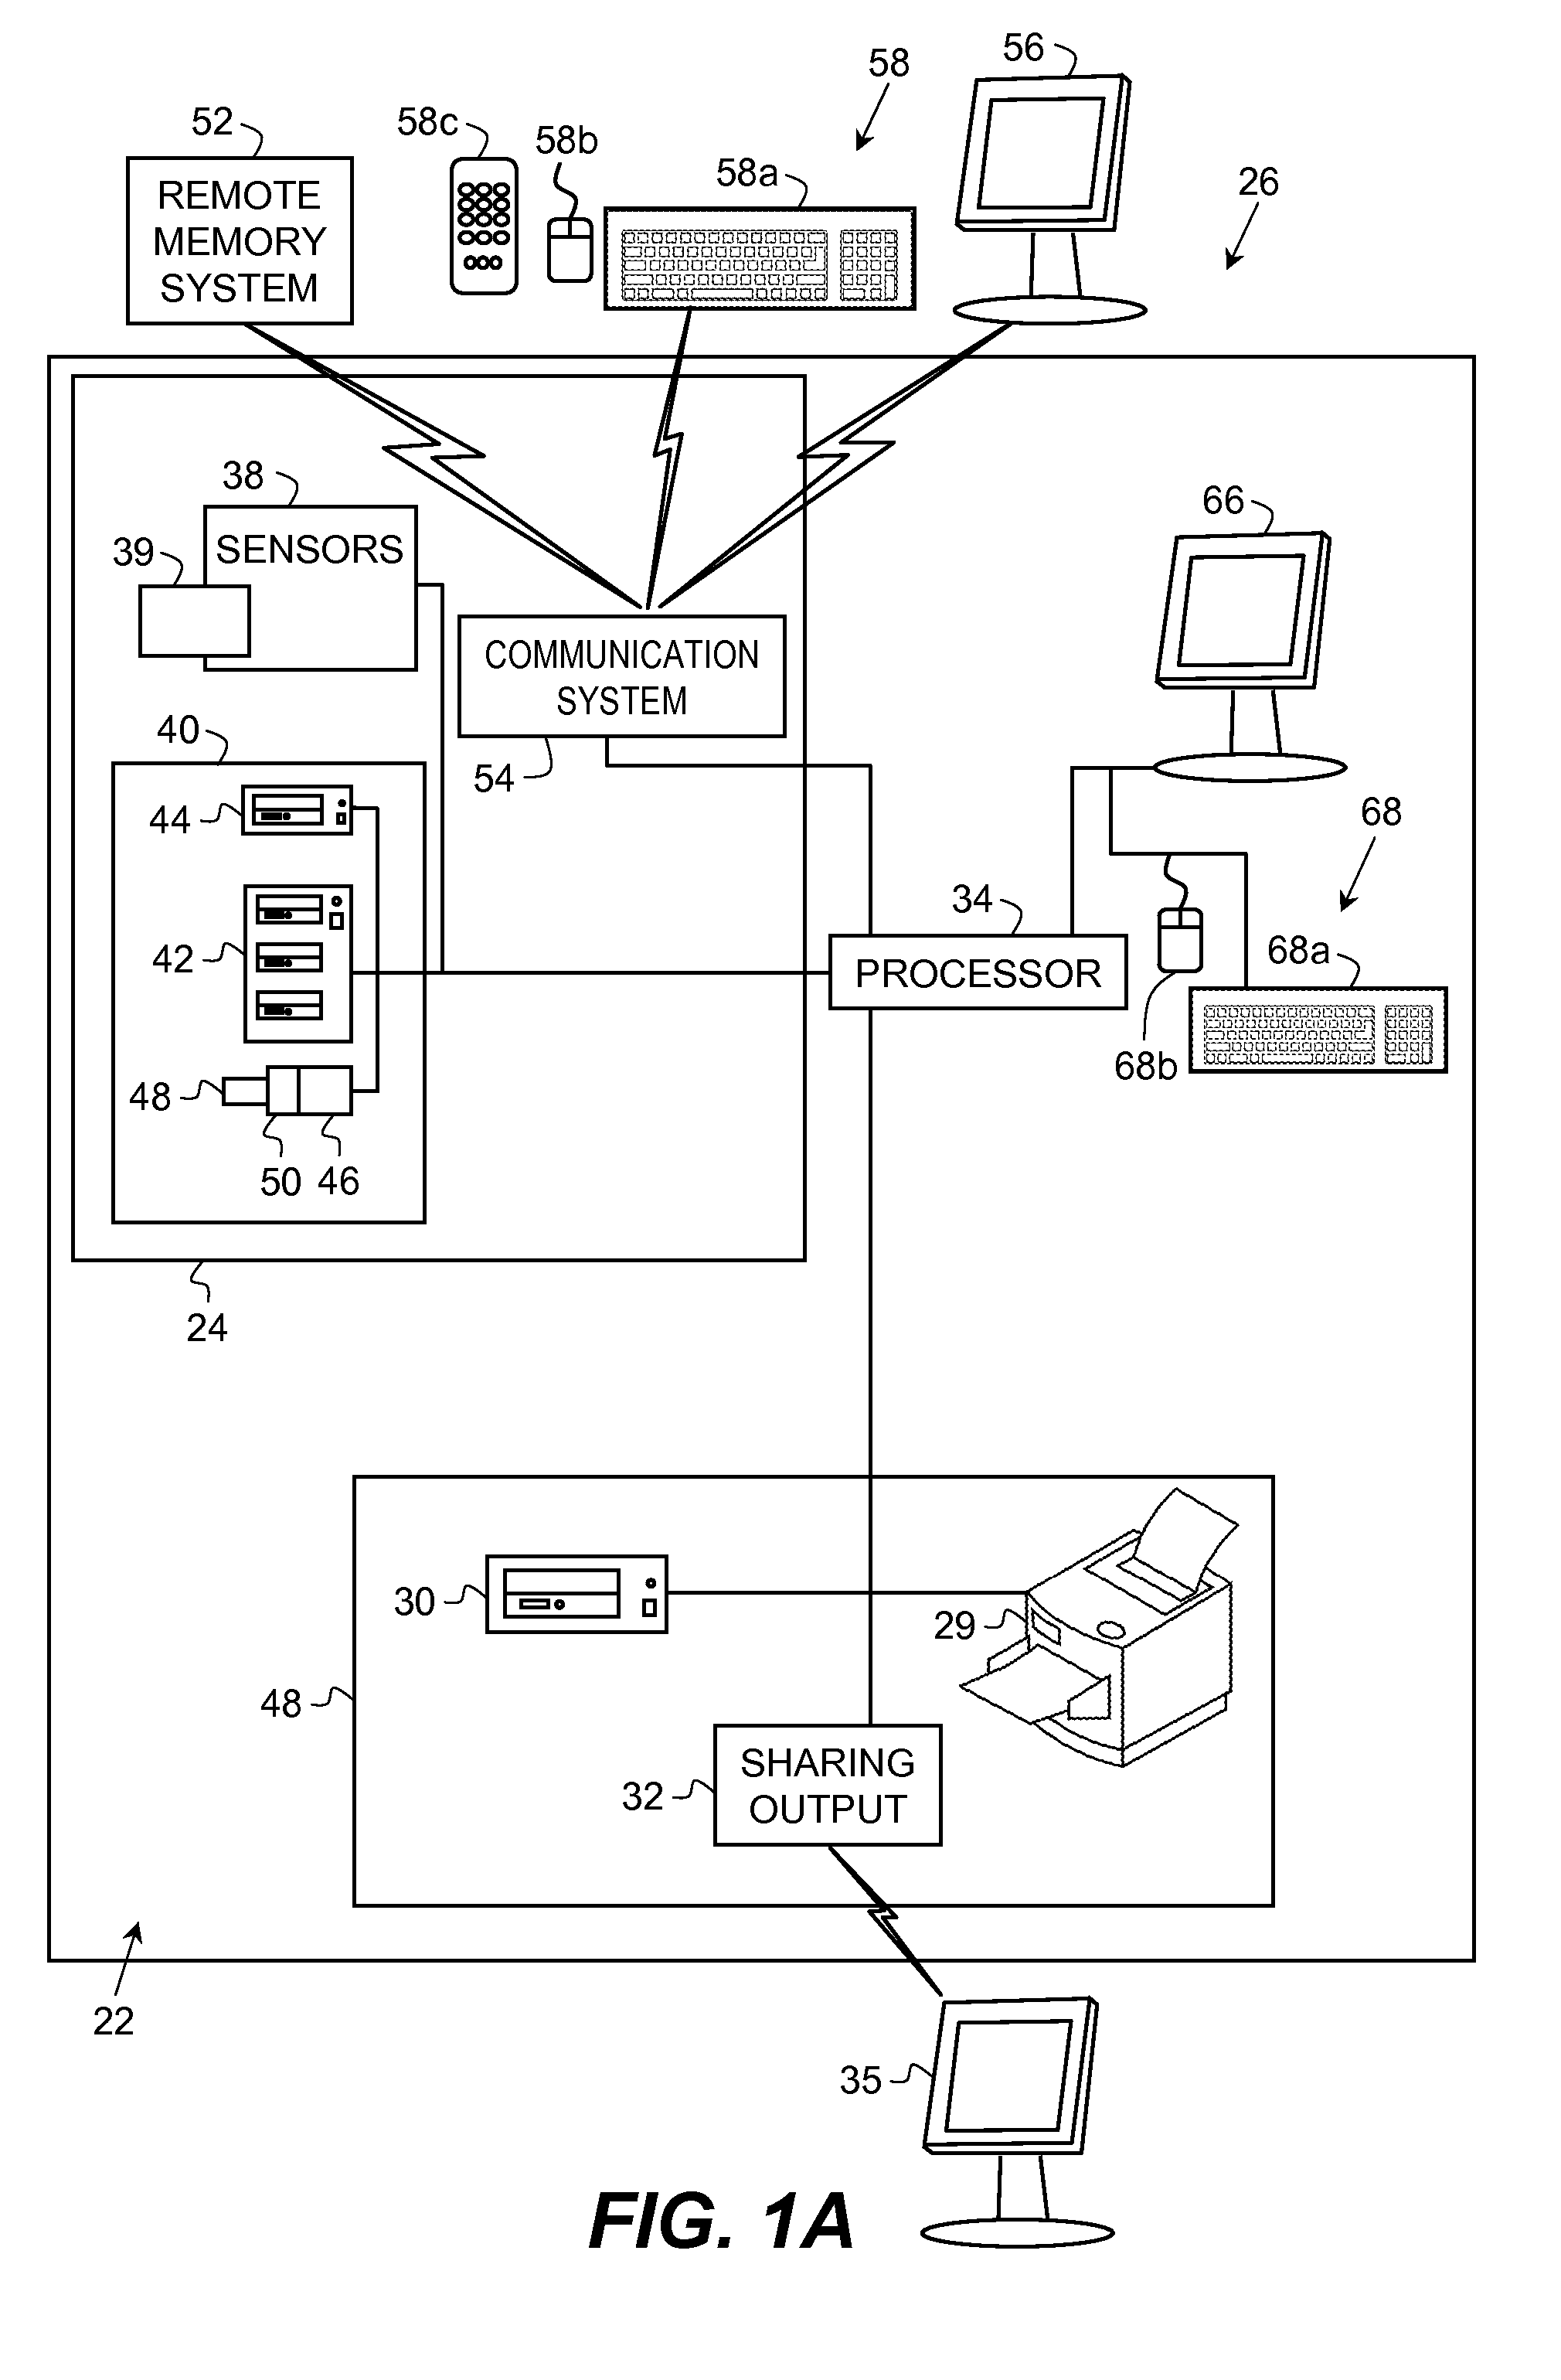 Image capture method with artistic template design